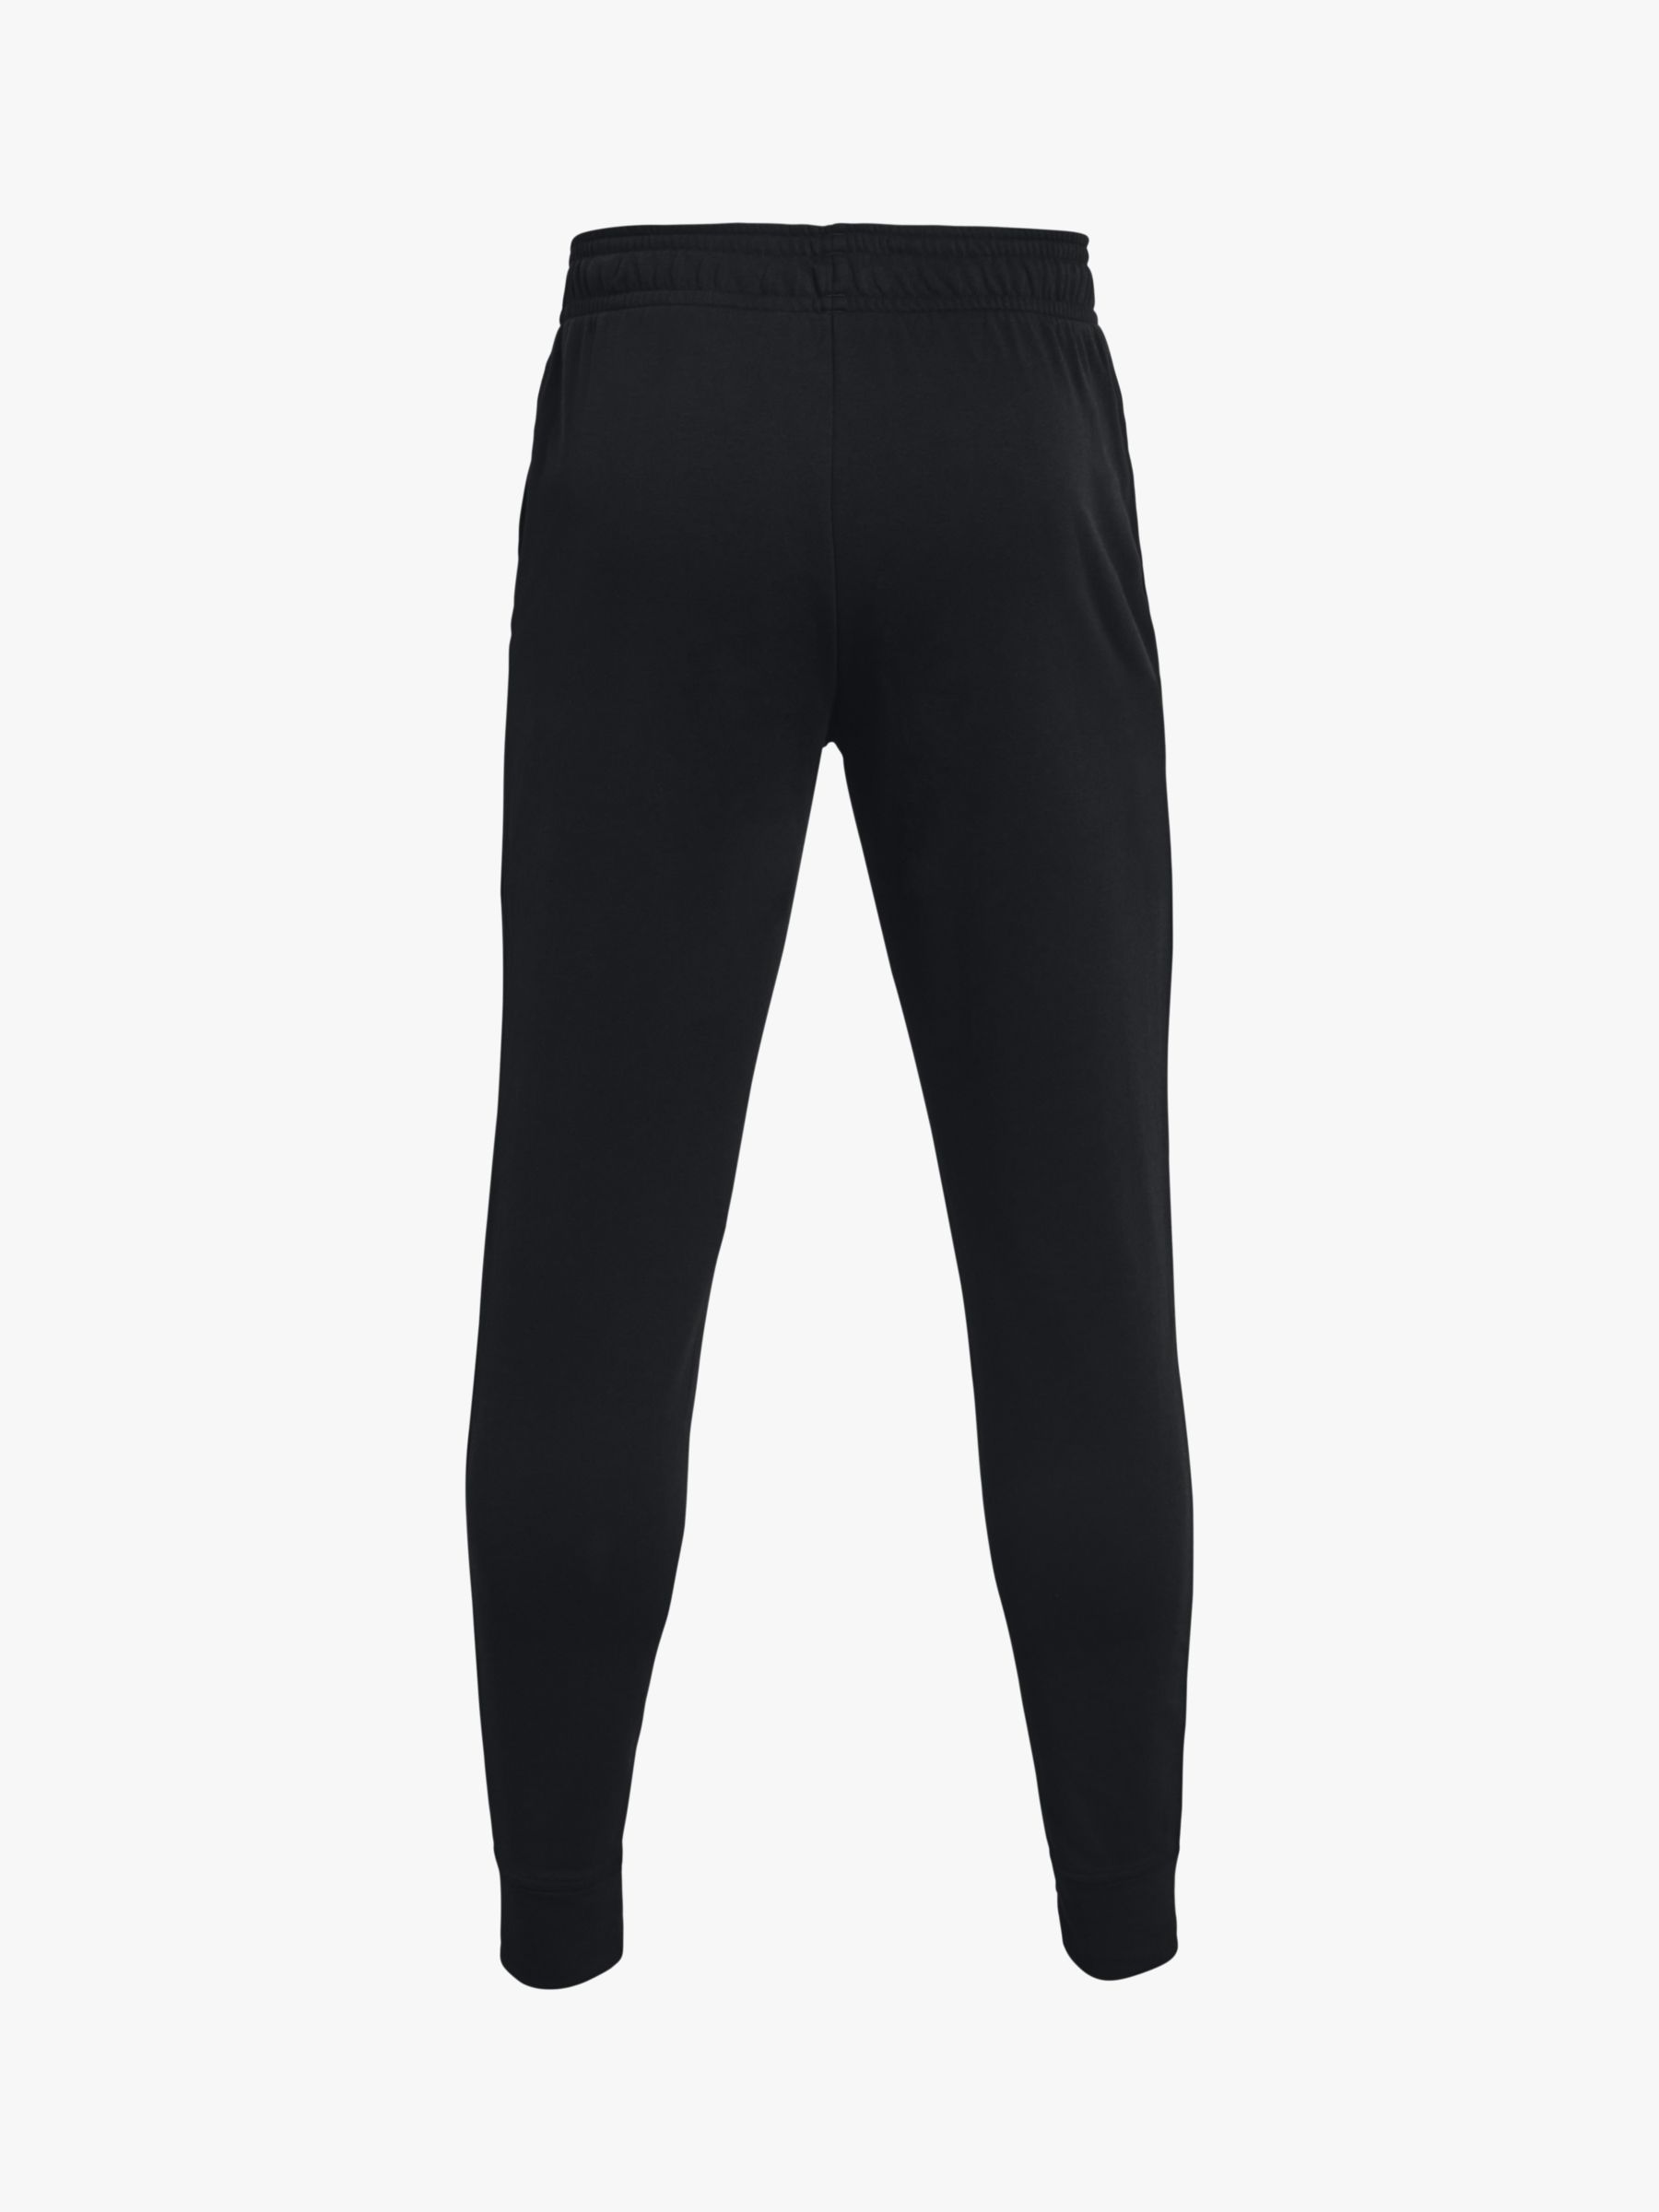 Under Armour Rival Terry Joggers, Black at John Lewis & Partners